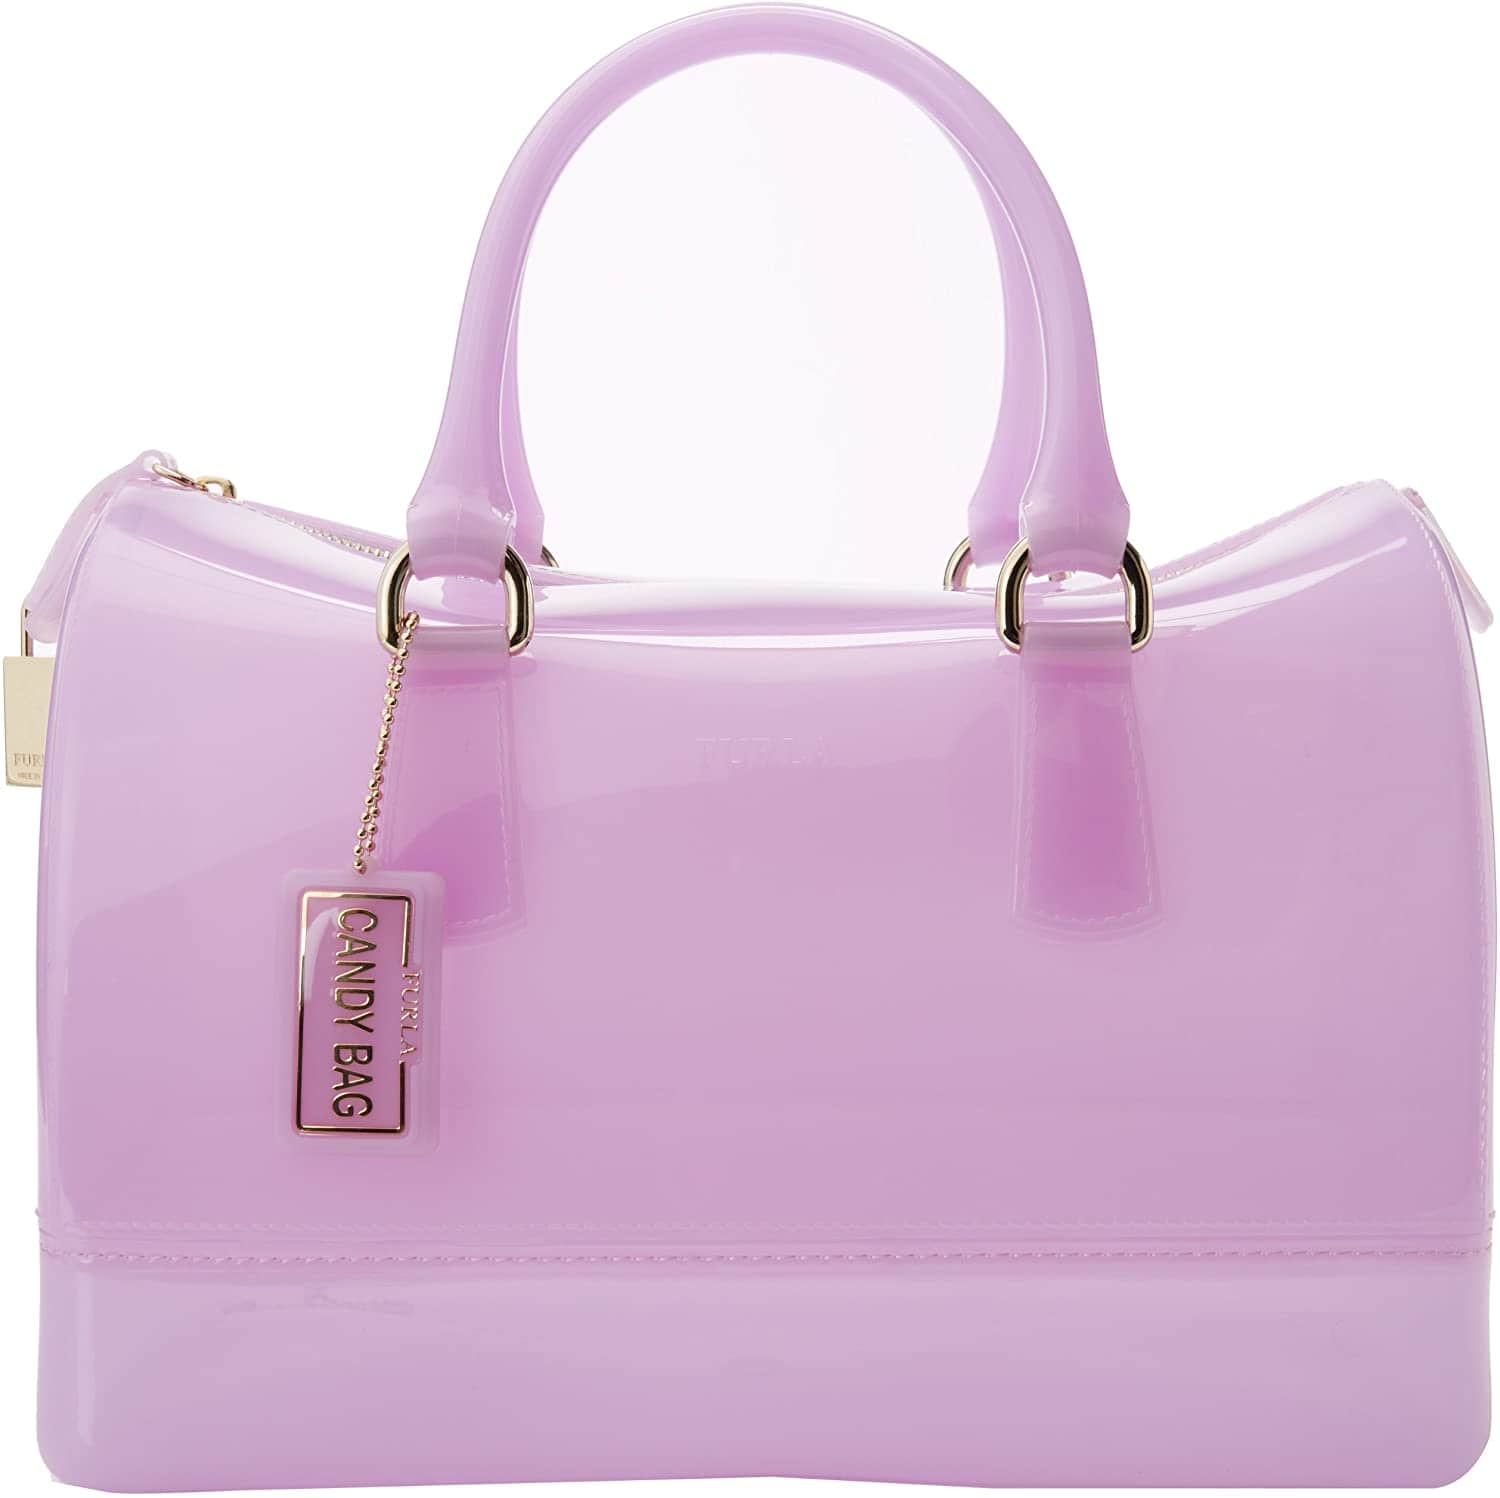 Furla's Candy PVC bag is popular among the younger demographic